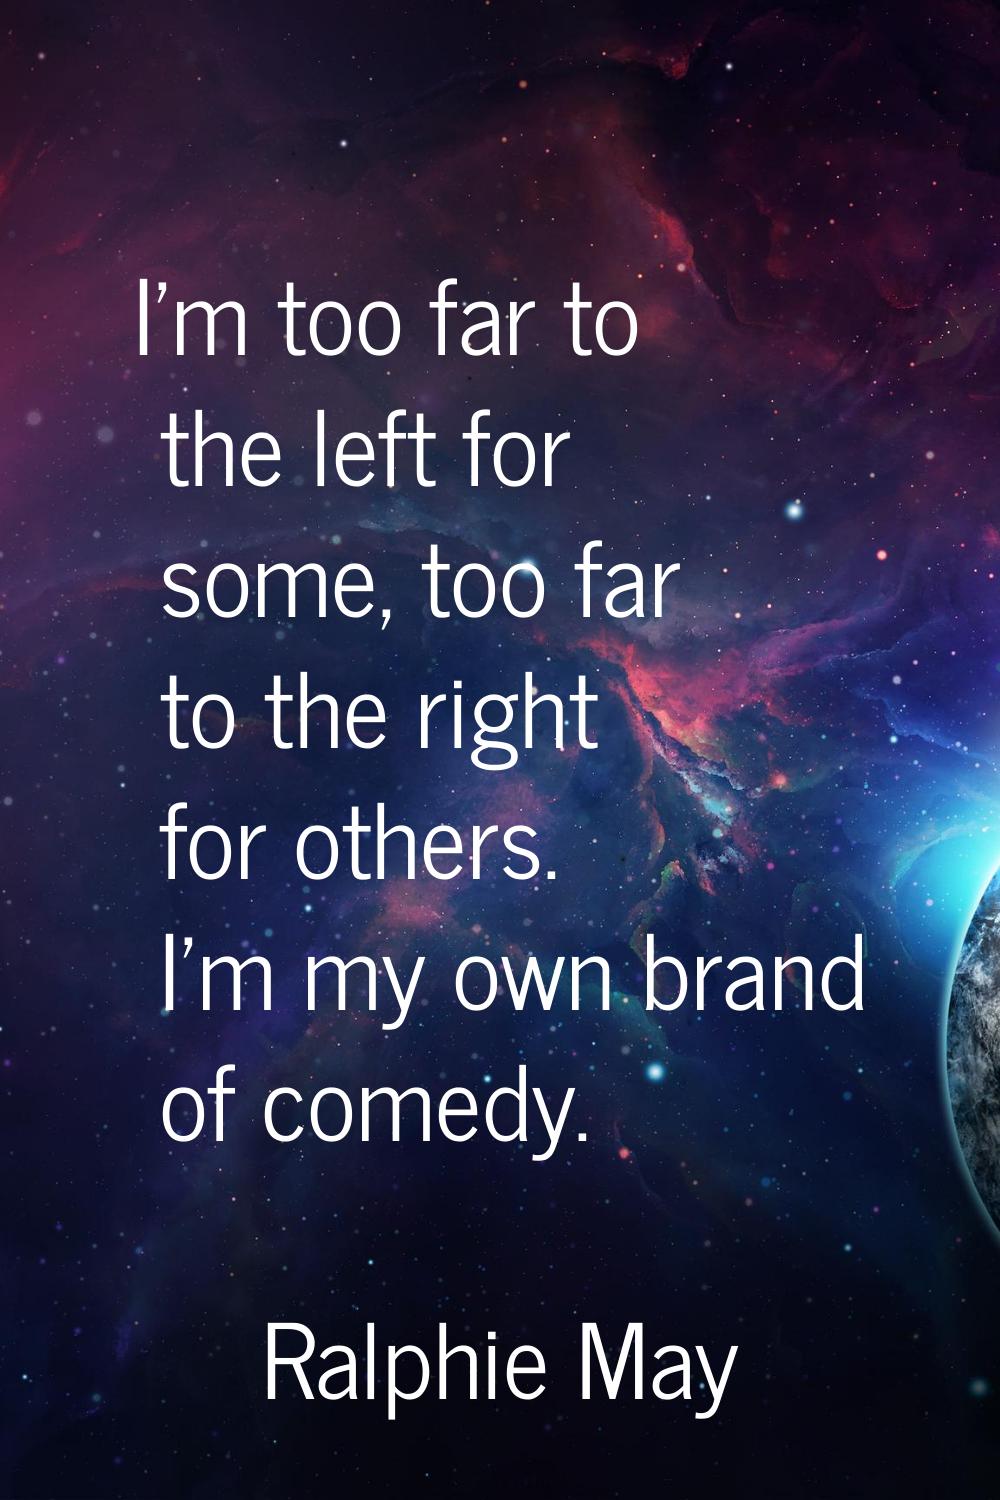 I'm too far to the left for some, too far to the right for others. I'm my own brand of comedy.